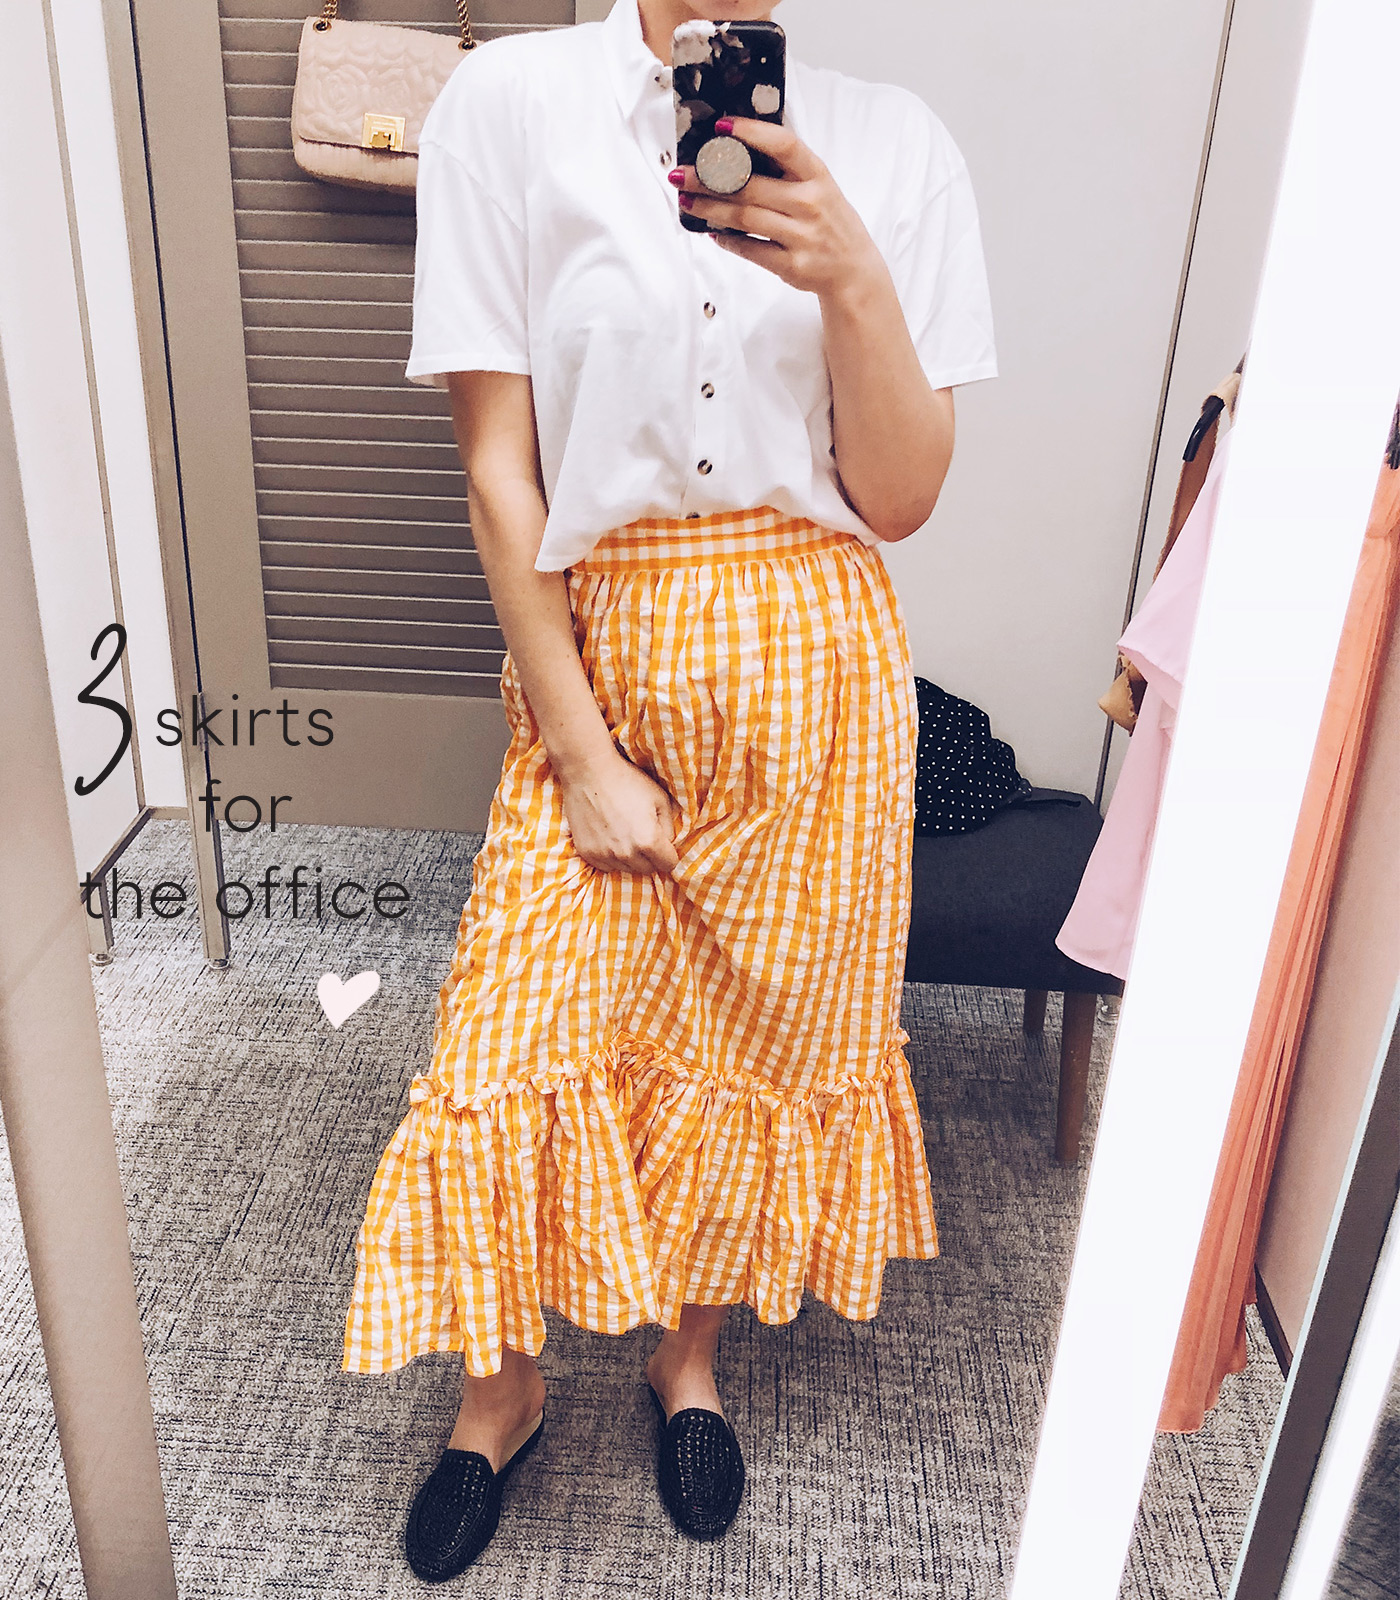 Summer skirts to wear to the office in Austin